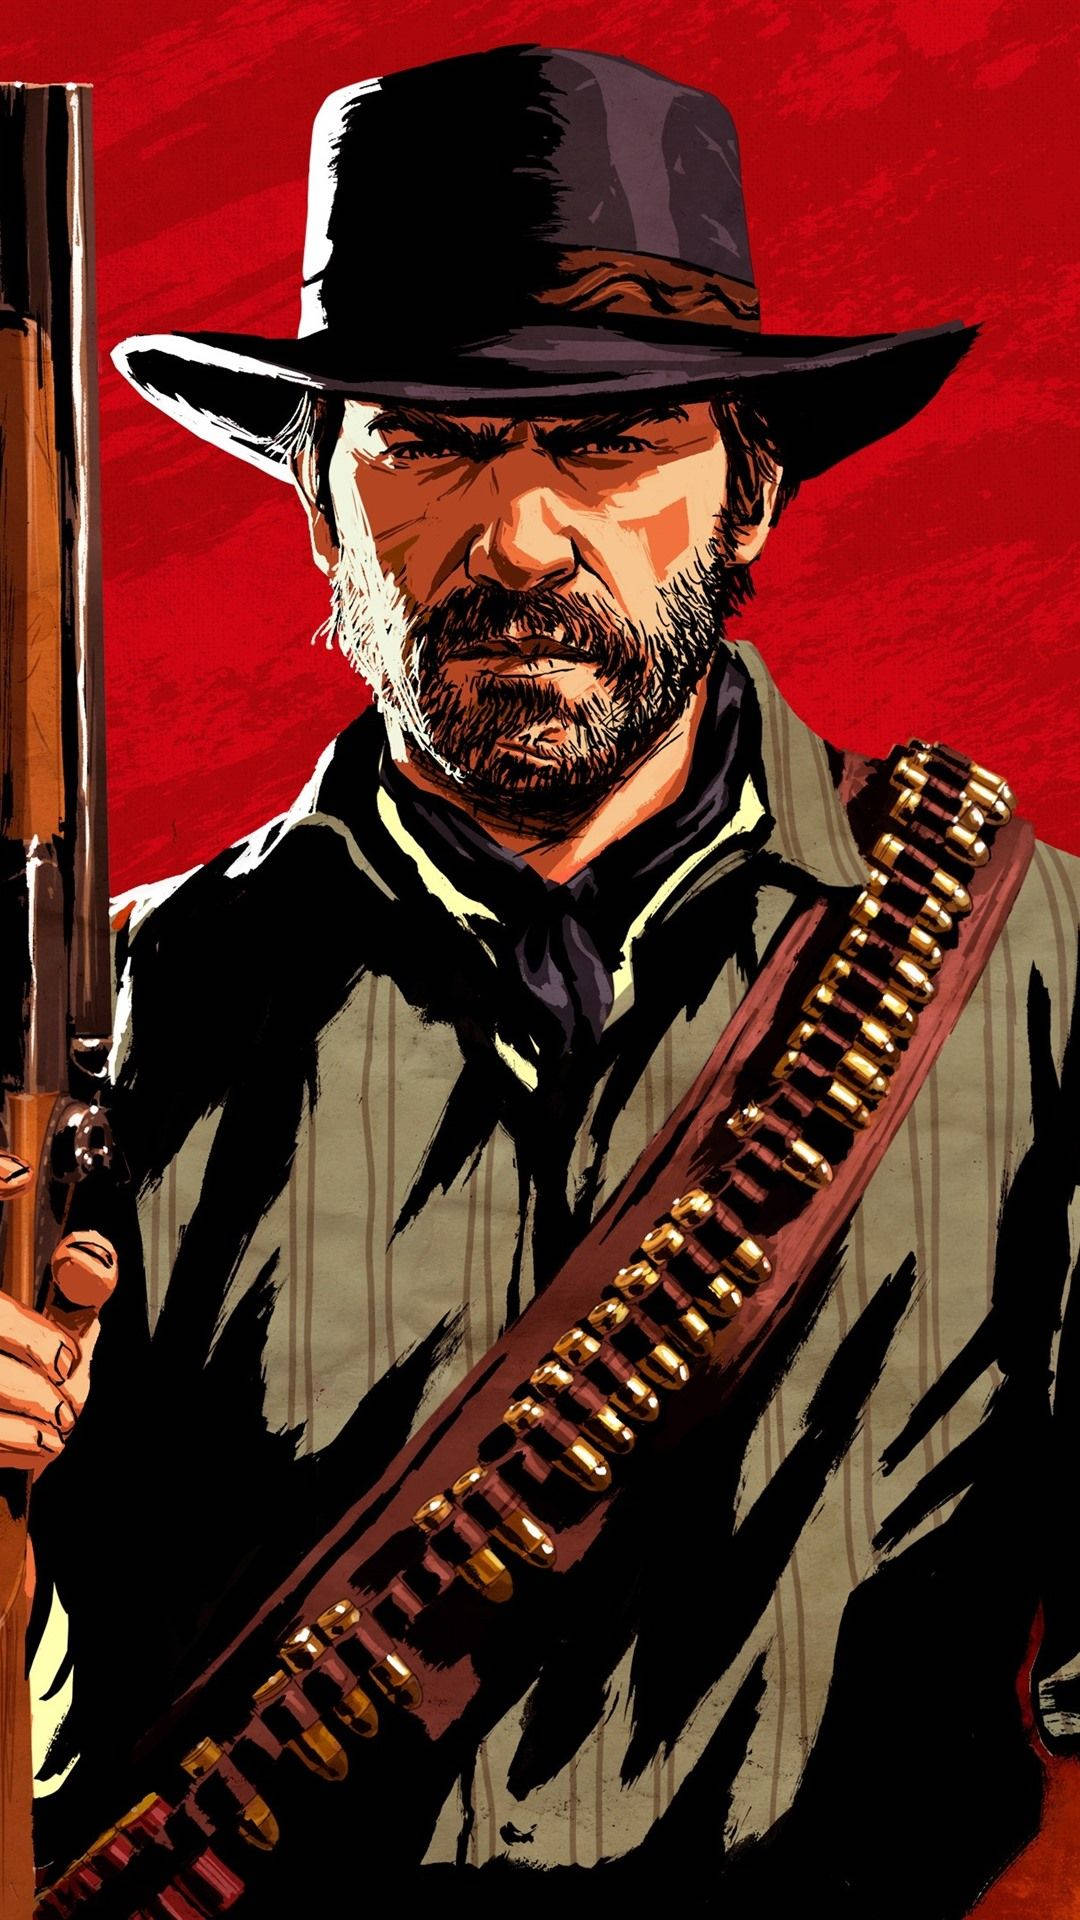 Wallpaper ID 1040759  outlaws Arthur Morgan screen shot 1080P Red  Dead Redemption 2 free download